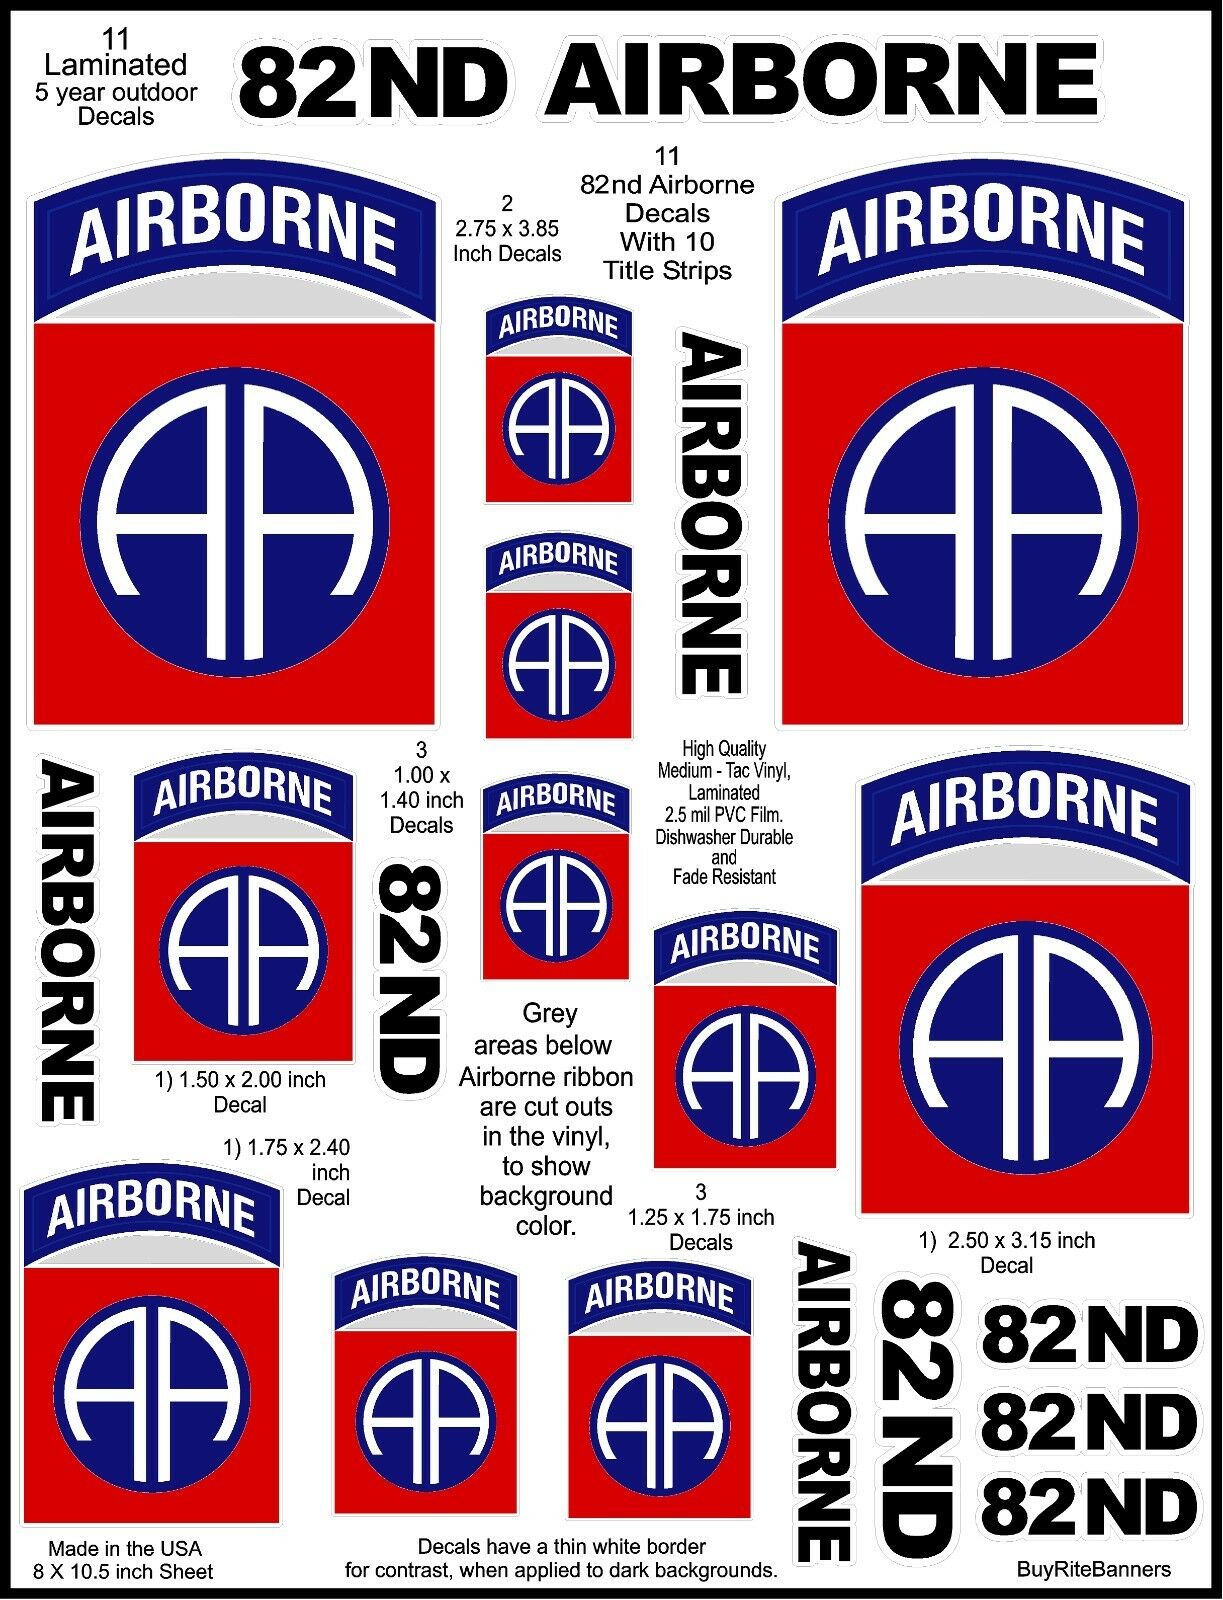 82nd Airborne Us Army Decals Stickers. 11 Stickers. Laminated For Durability